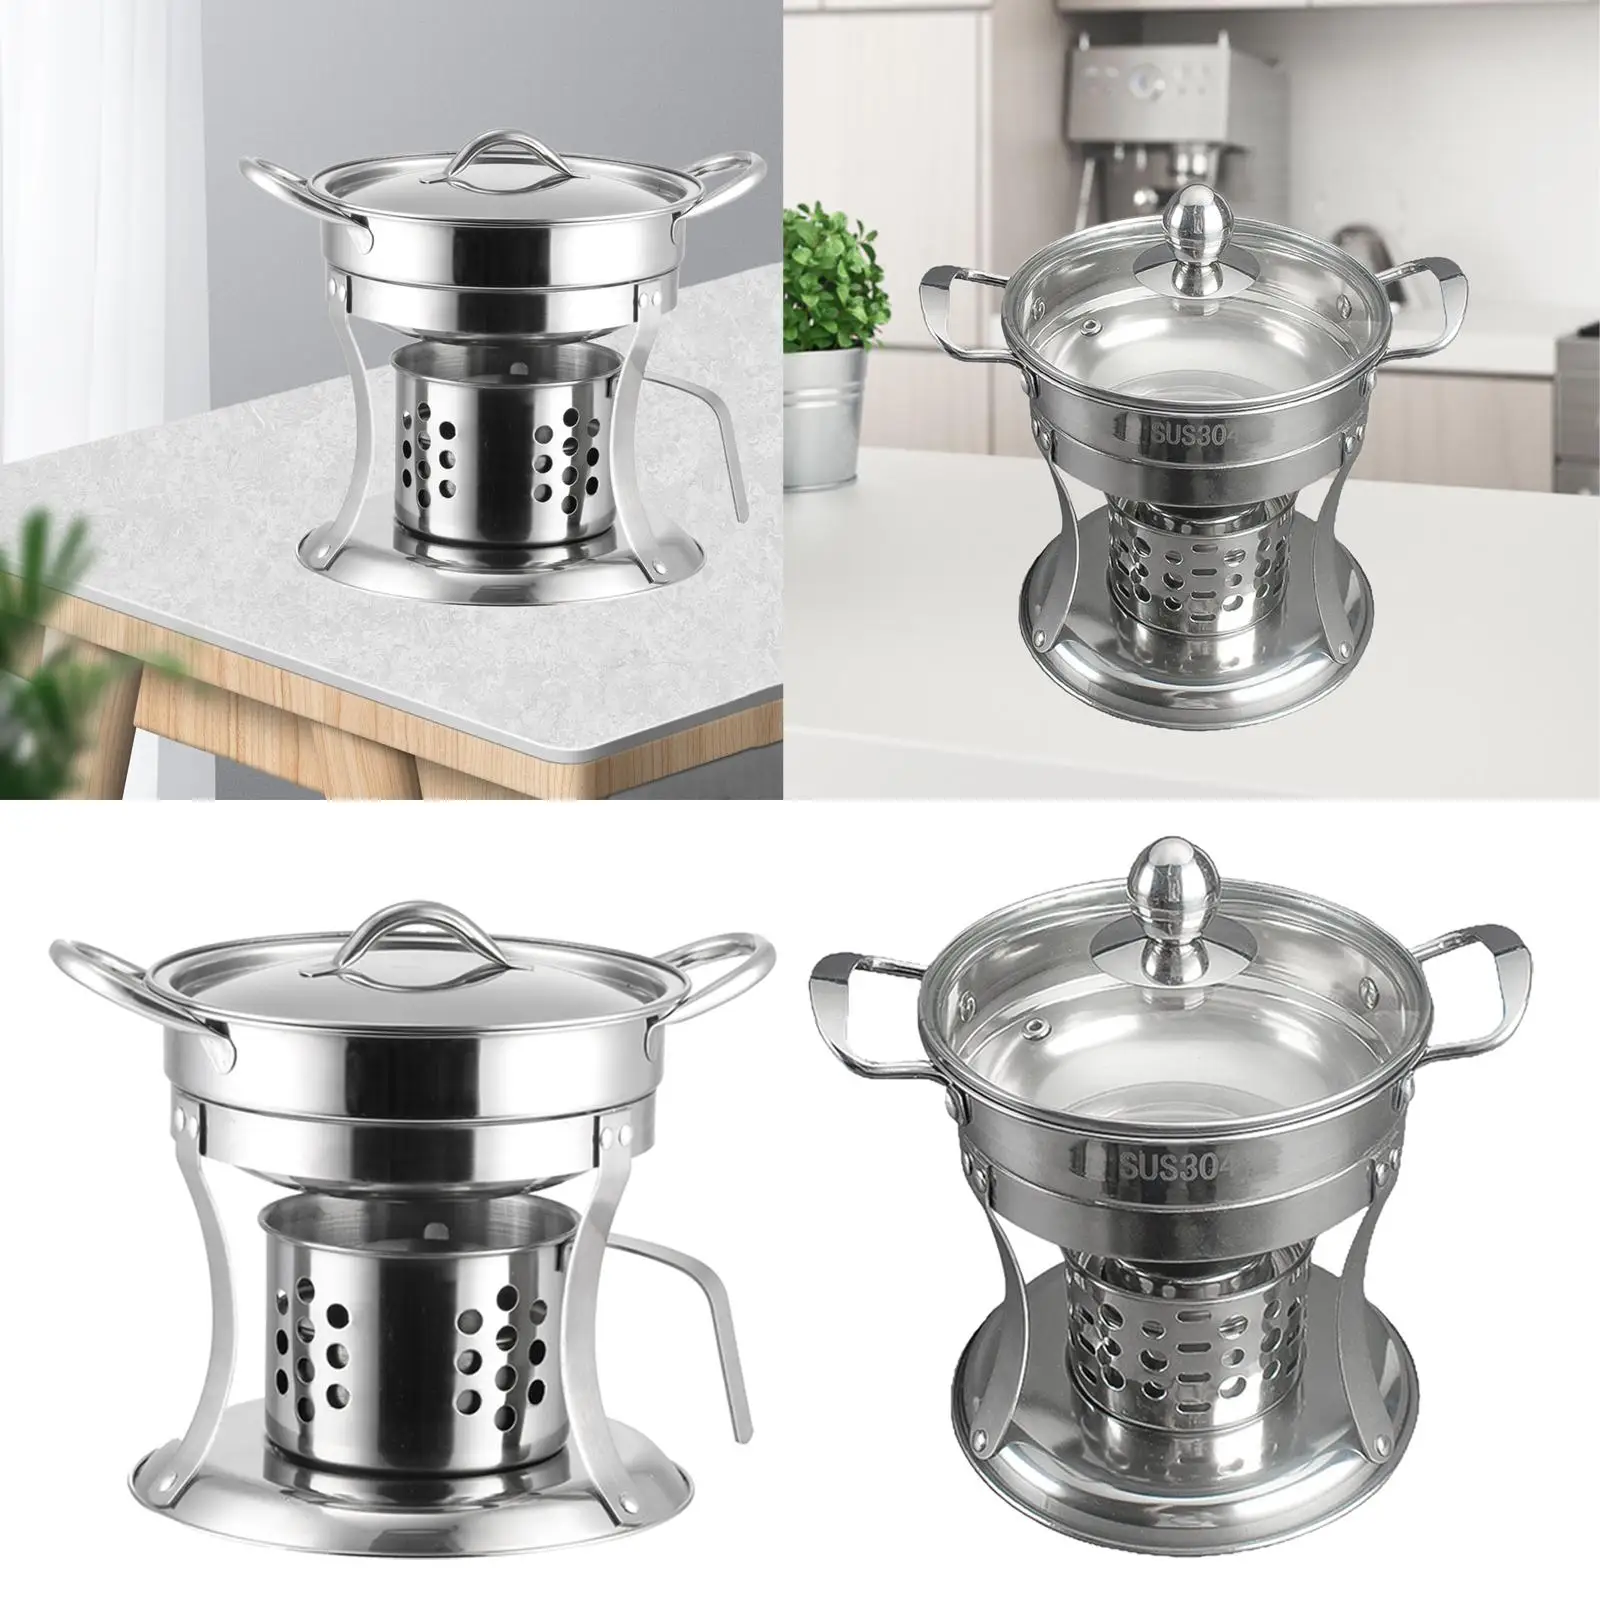 Stainless Steel Chafing Dish Hot Cheese Fondue Set Melting Pot Single Non-magnetic Alcohol Burner for Camping